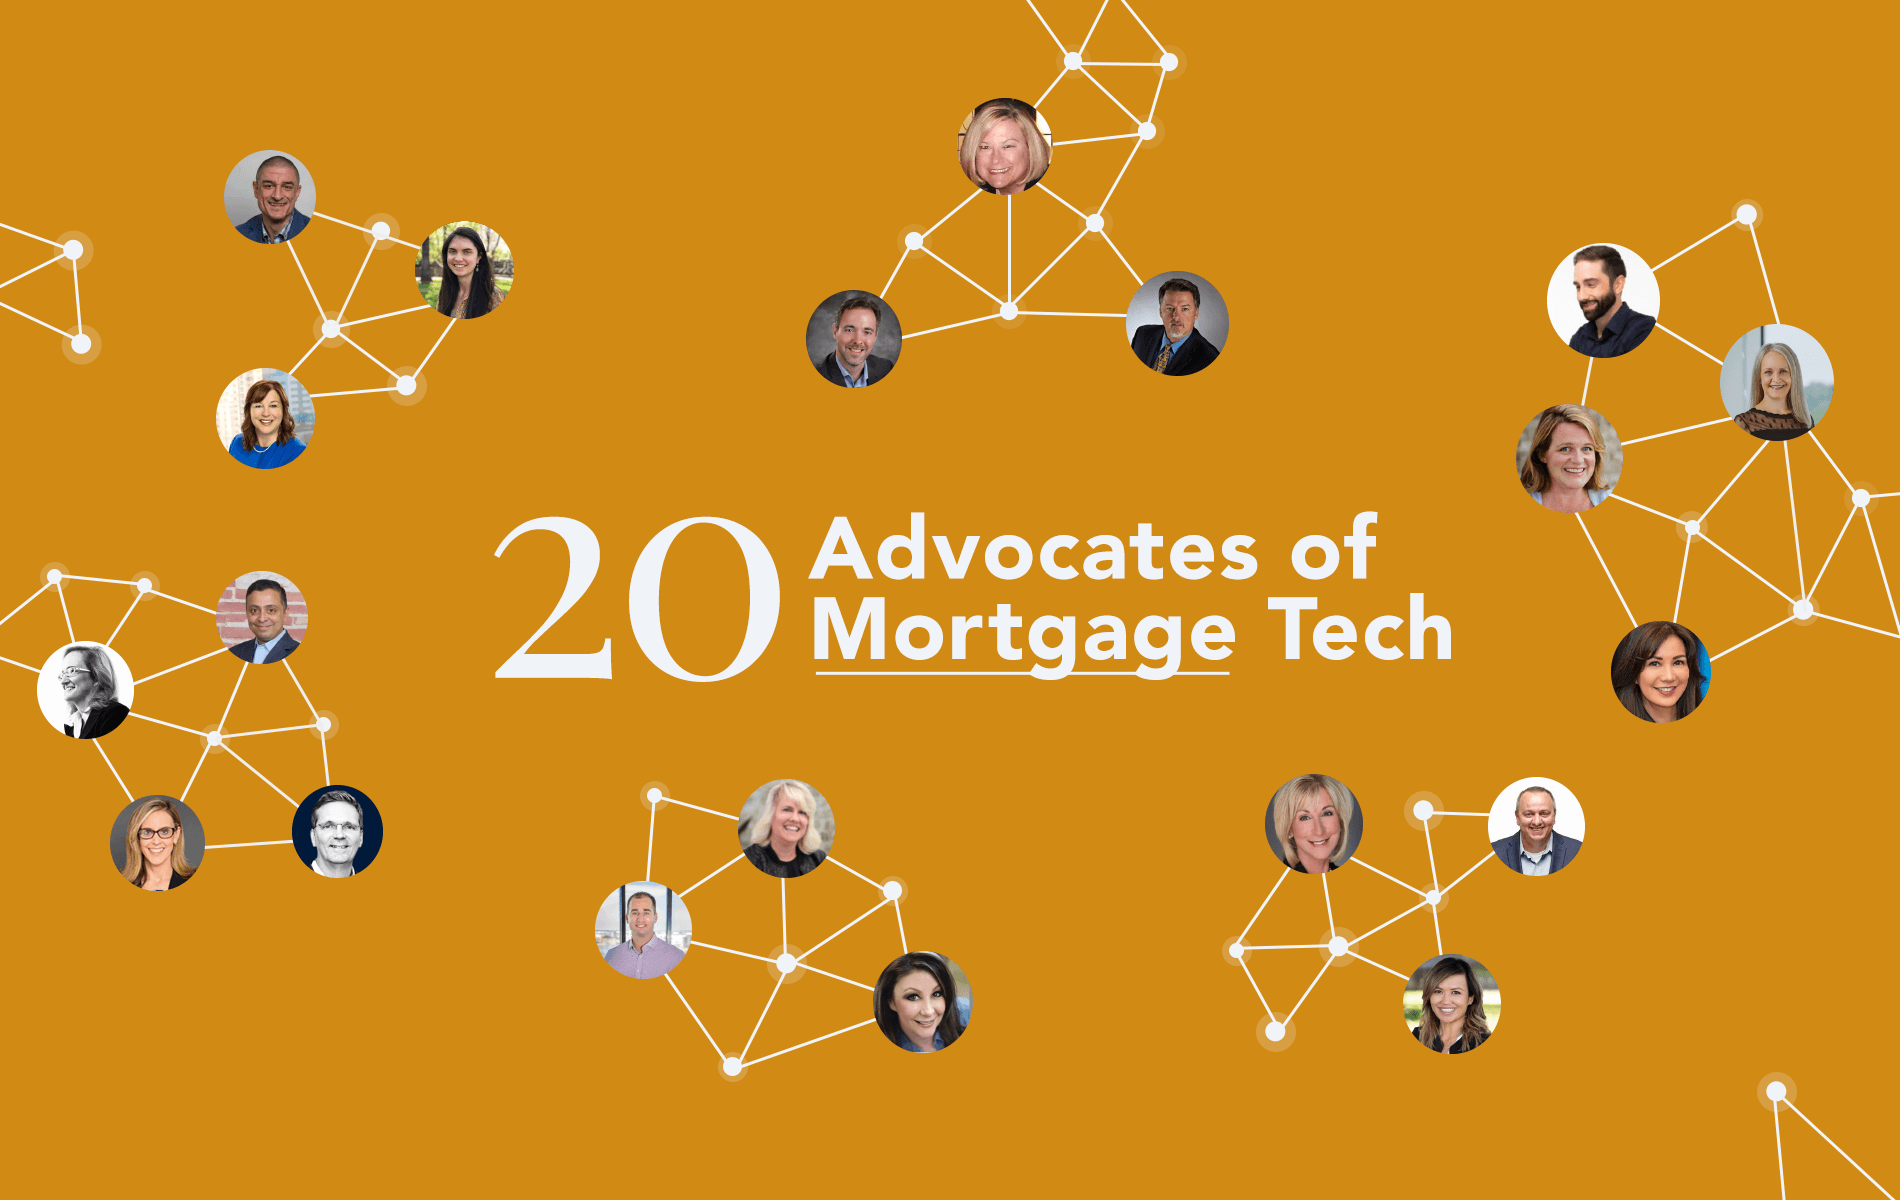 an image that shows 20 advocates of mortgage tech